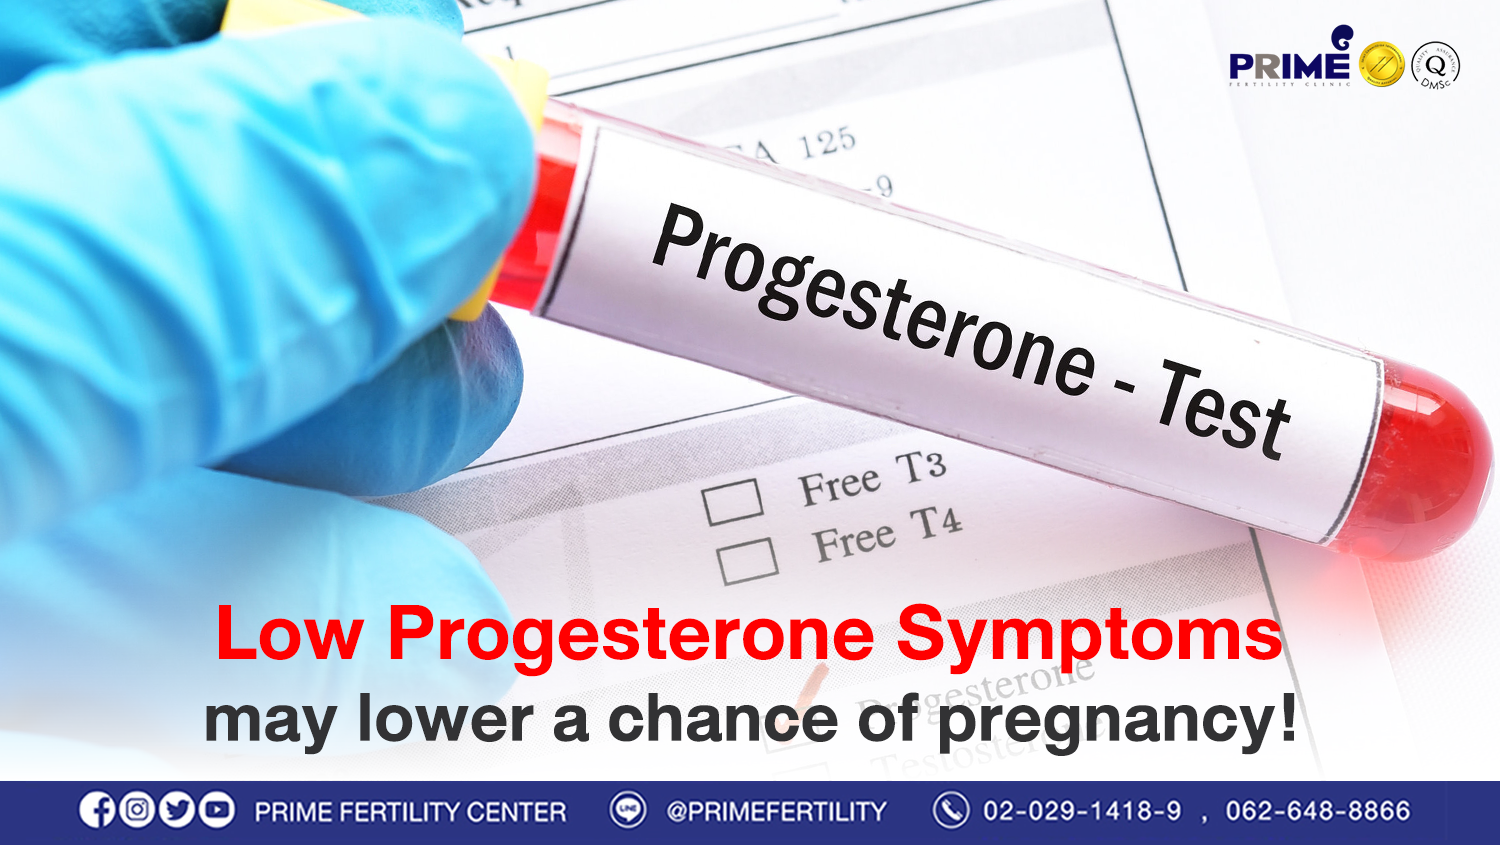 What would cause a luteal phase defect aside from low progesterone